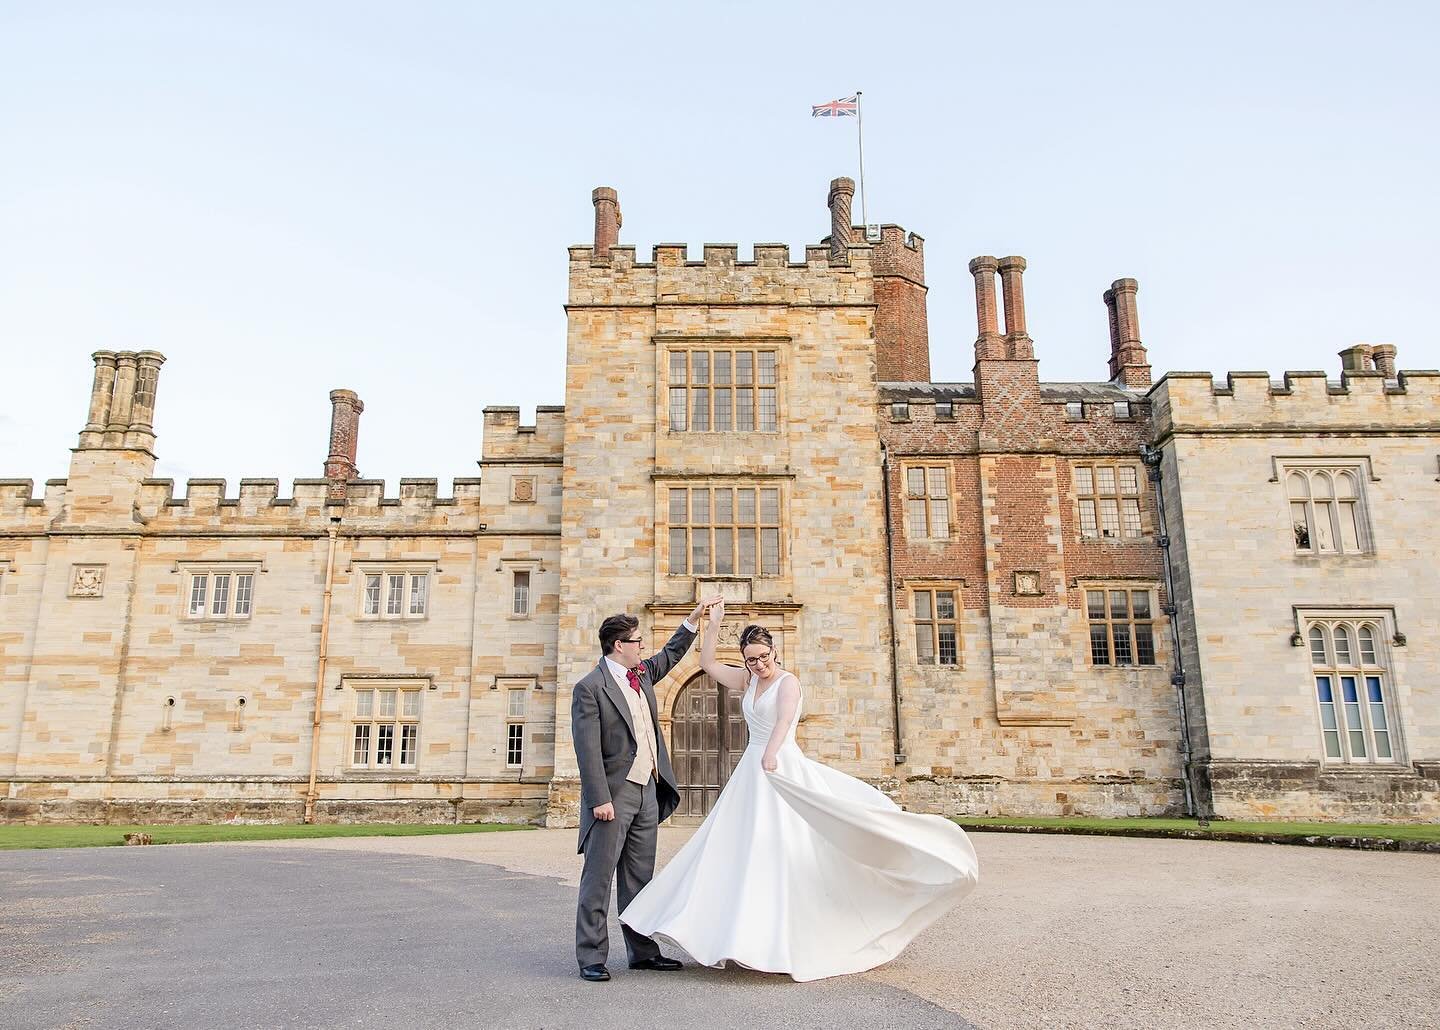 So happy to see Claudia &amp; Richard&rsquo;s gorgeous wedding at @penshurstplace featured in the latest issue of @a_kentish_ceremony magazine! 📸✨

Bathed in blue skies and the gardens bursting with blooms, capturing their love story was an absolute